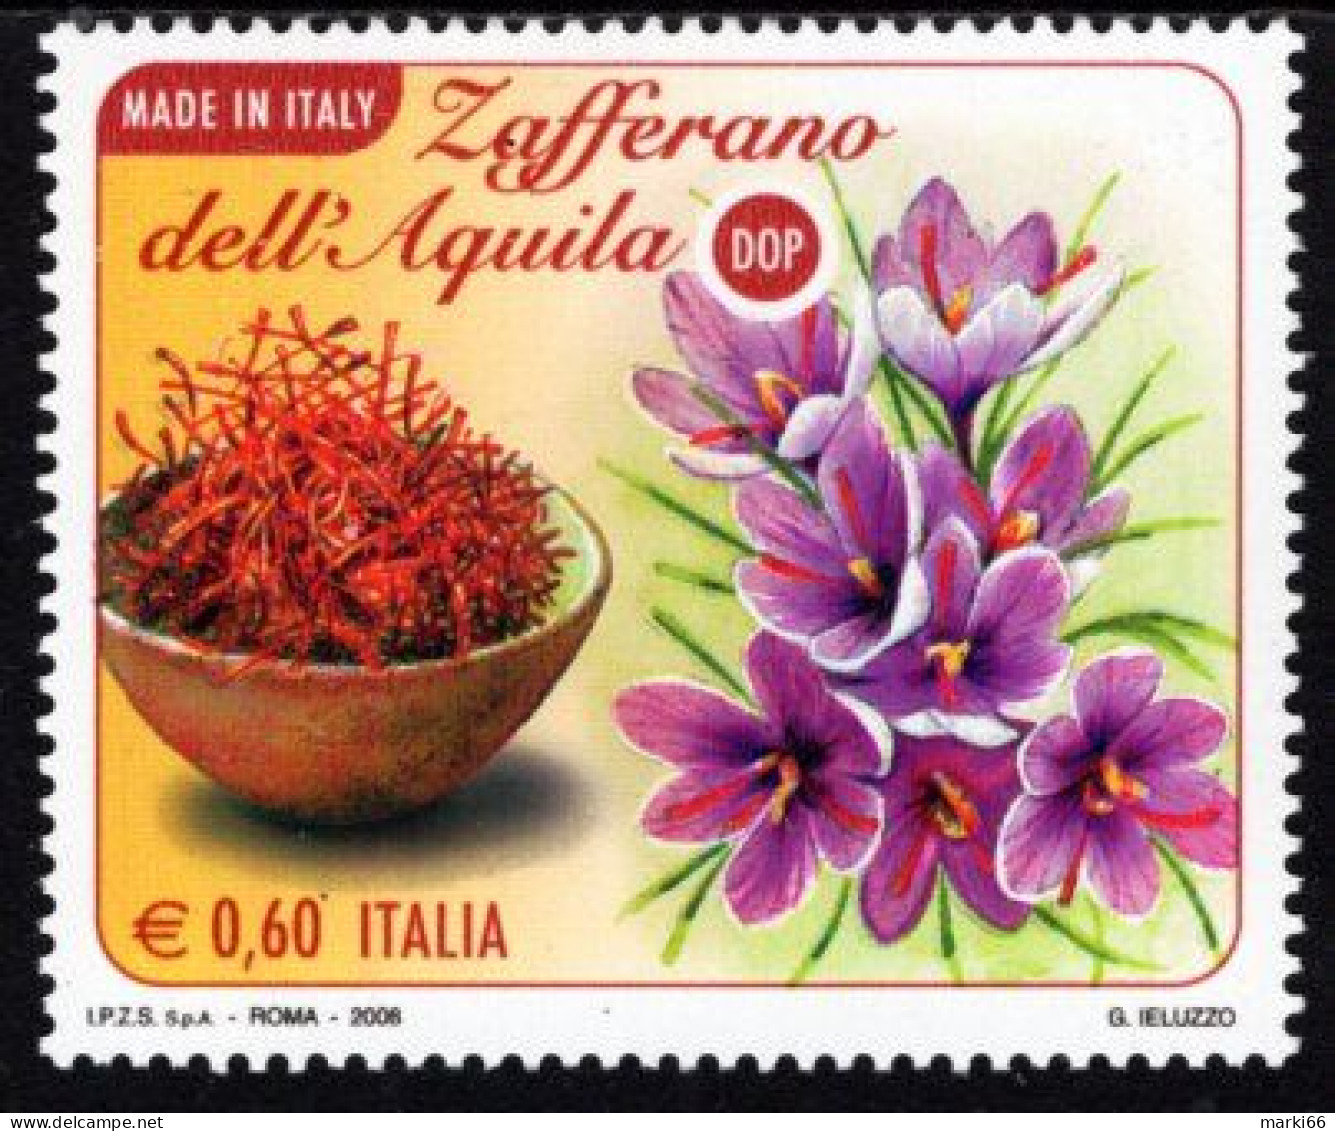 Italy - 2008 - Made In Italy - Saffron Of Aquila - Mint Stamp - 2001-10: Neufs